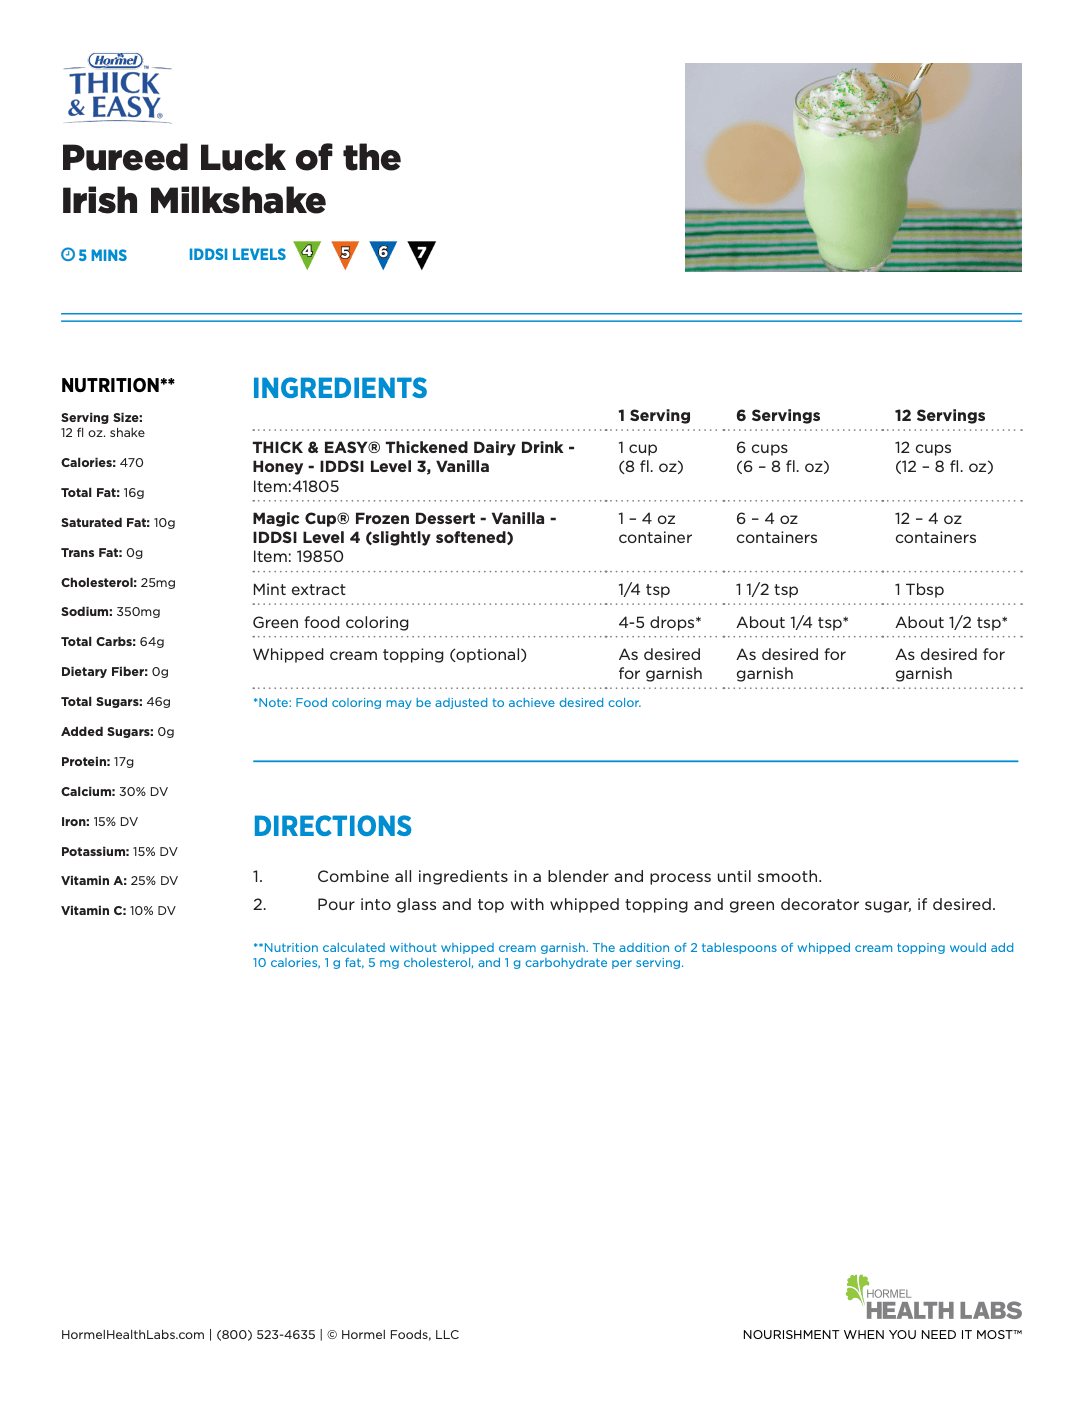 The back page of the Luck of the Irish Shake recipe